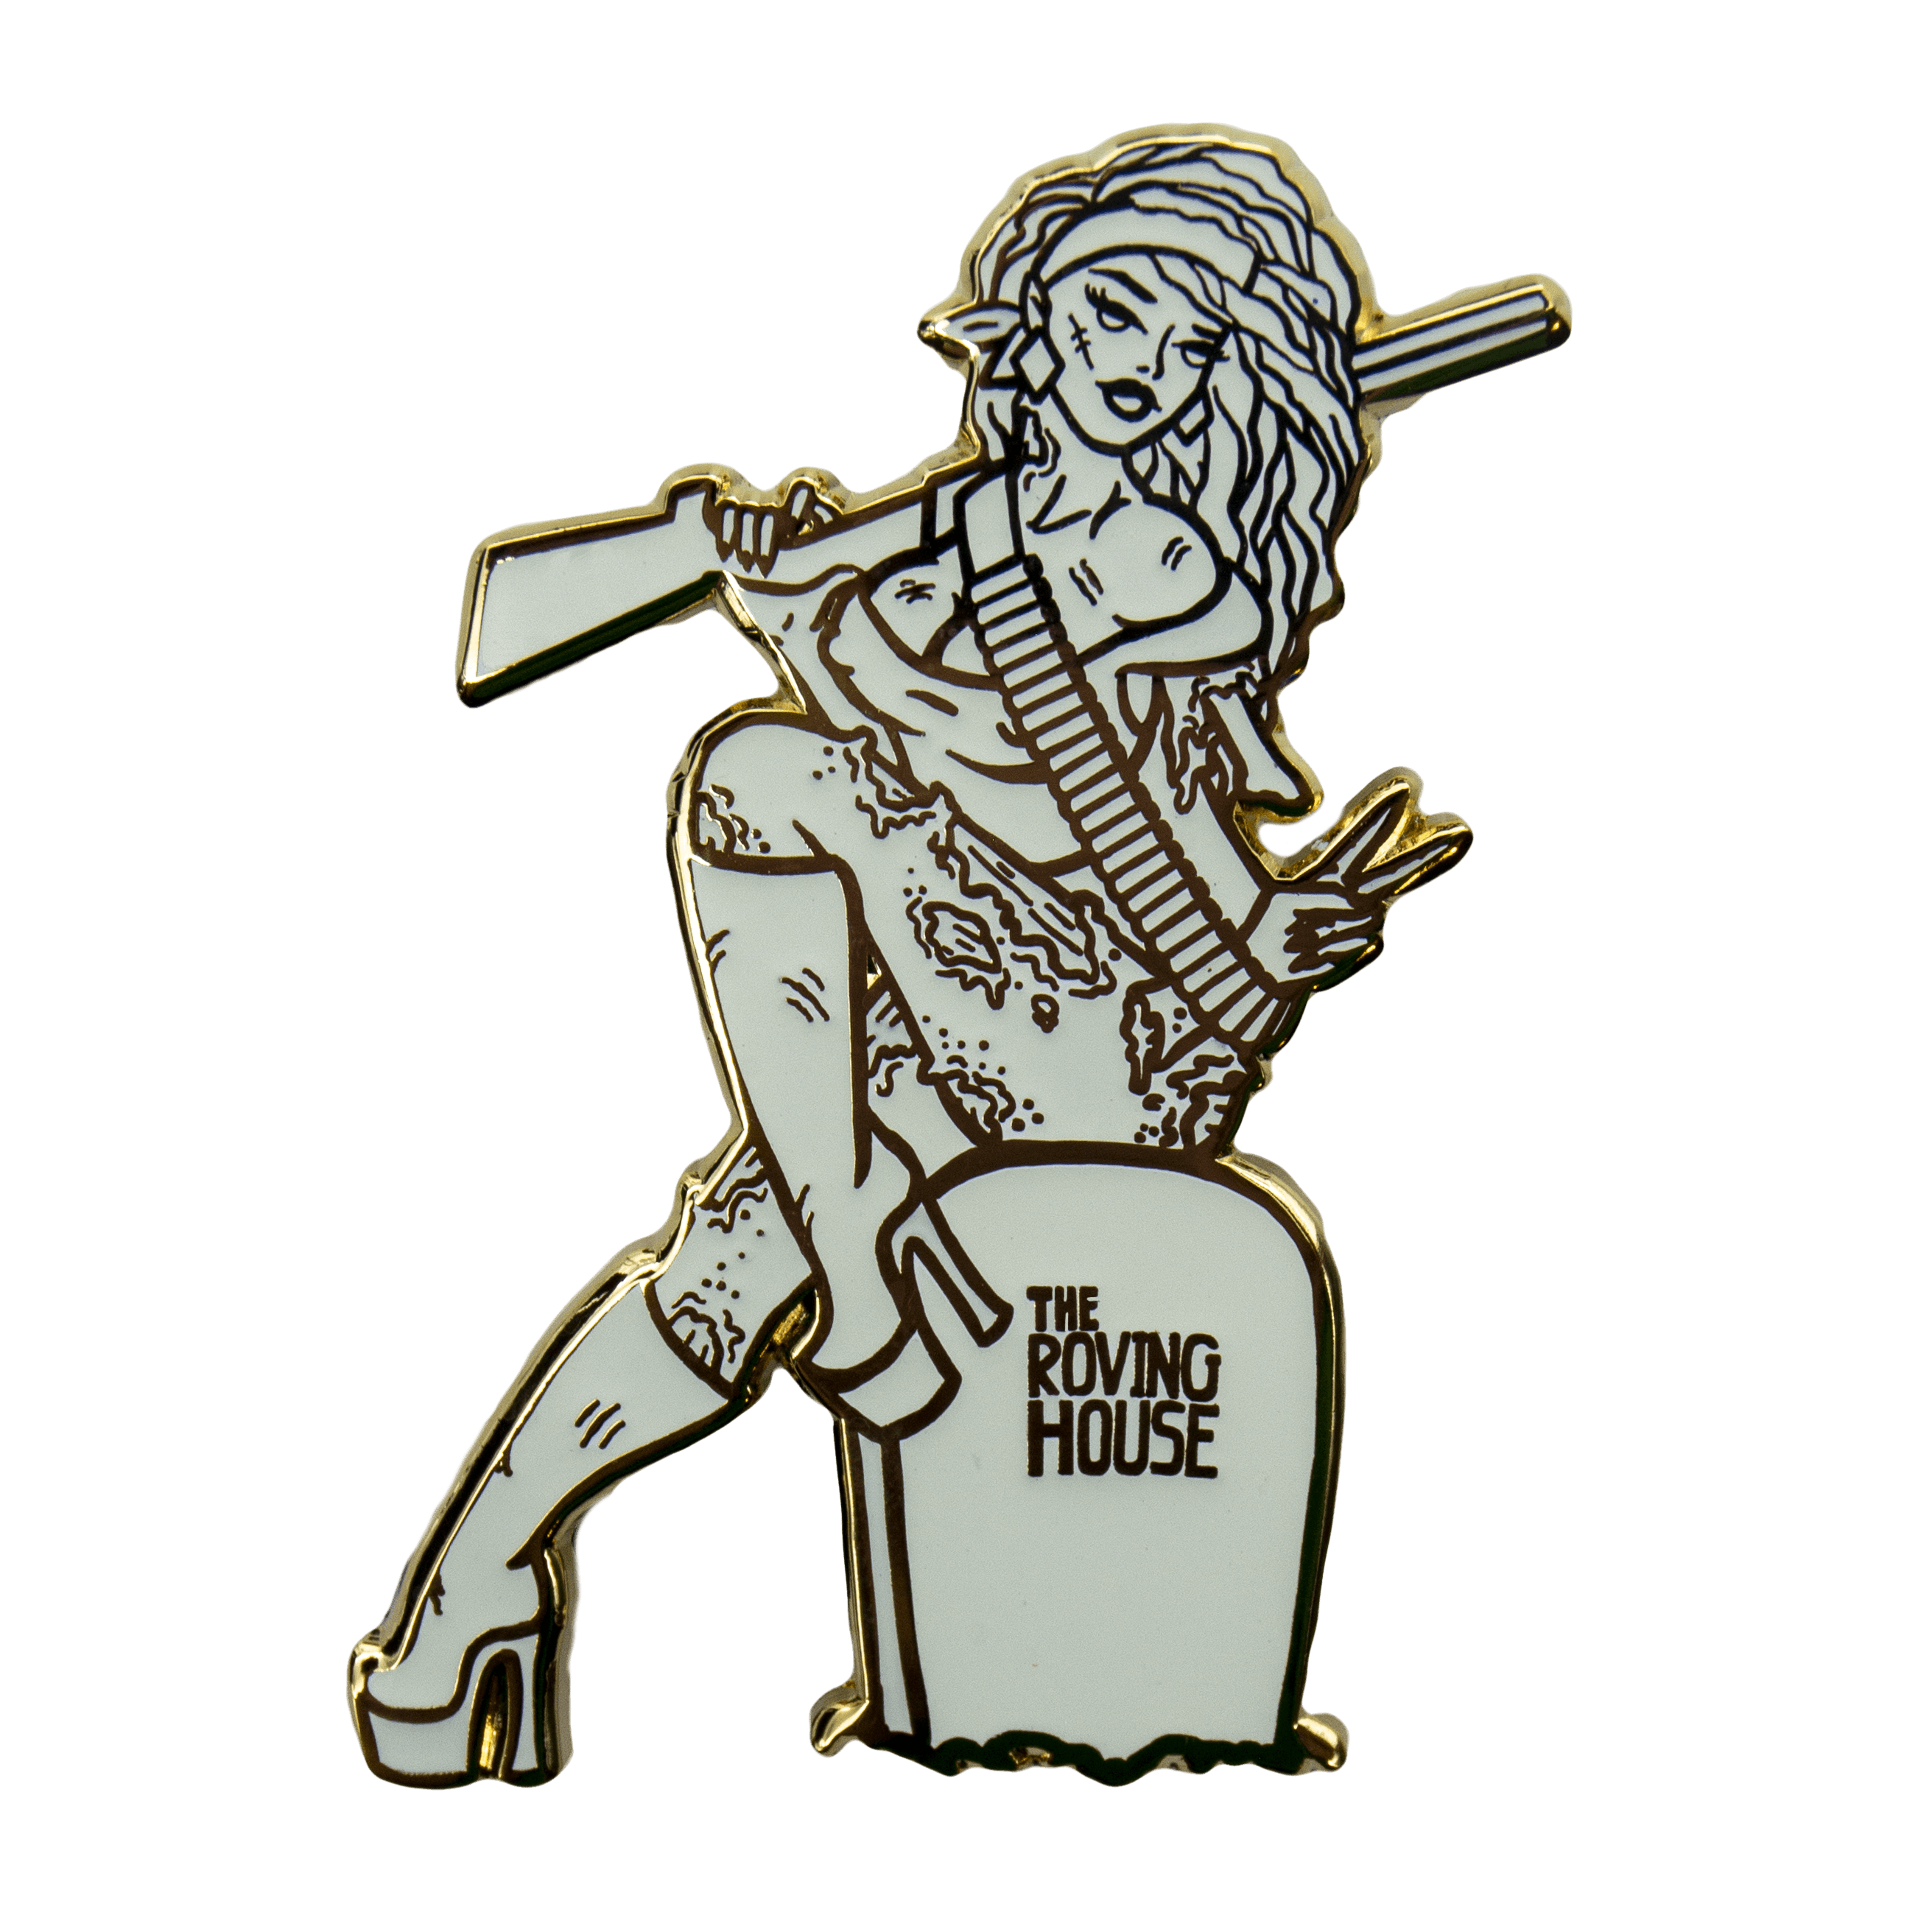 Whiteout Billie 2021 Zombie Pin-up | Gold Club Pin